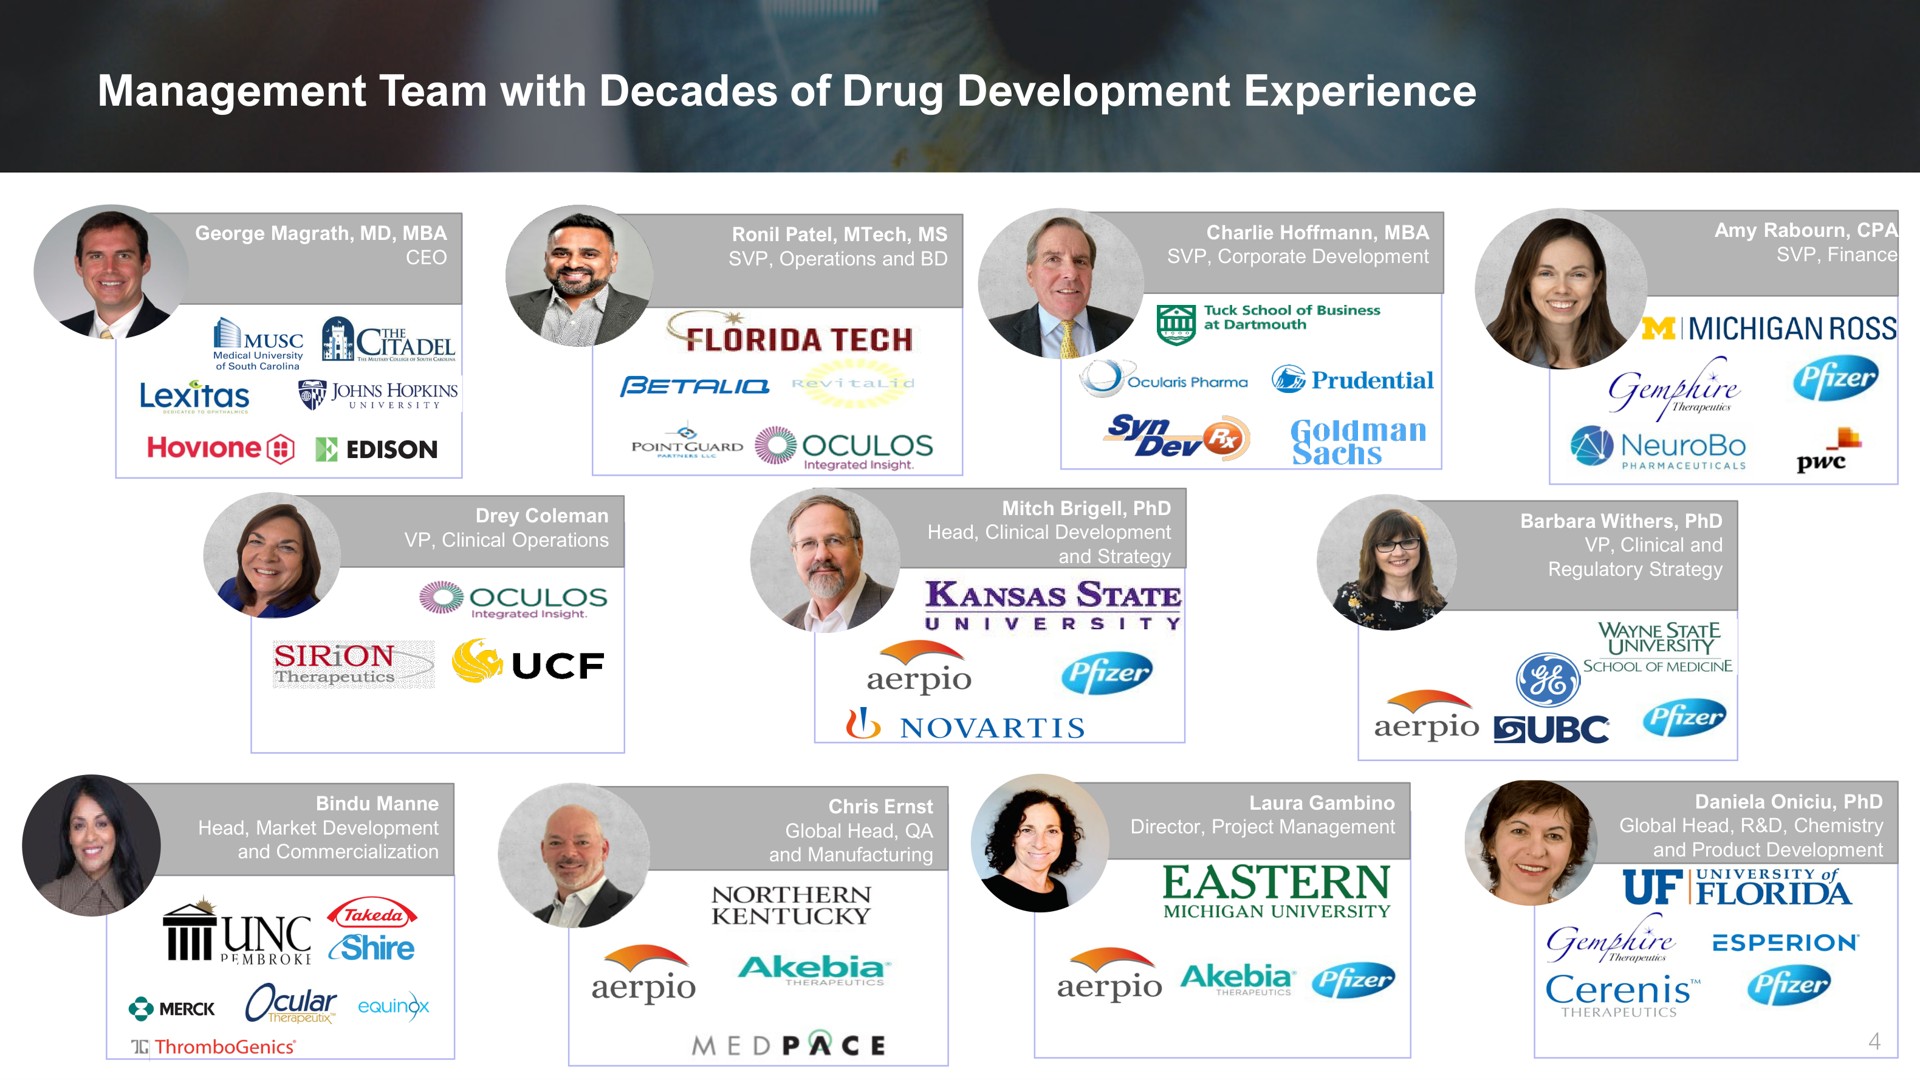 management team with decades of drug development experience horns tech a tae | Ocuphire Pharma